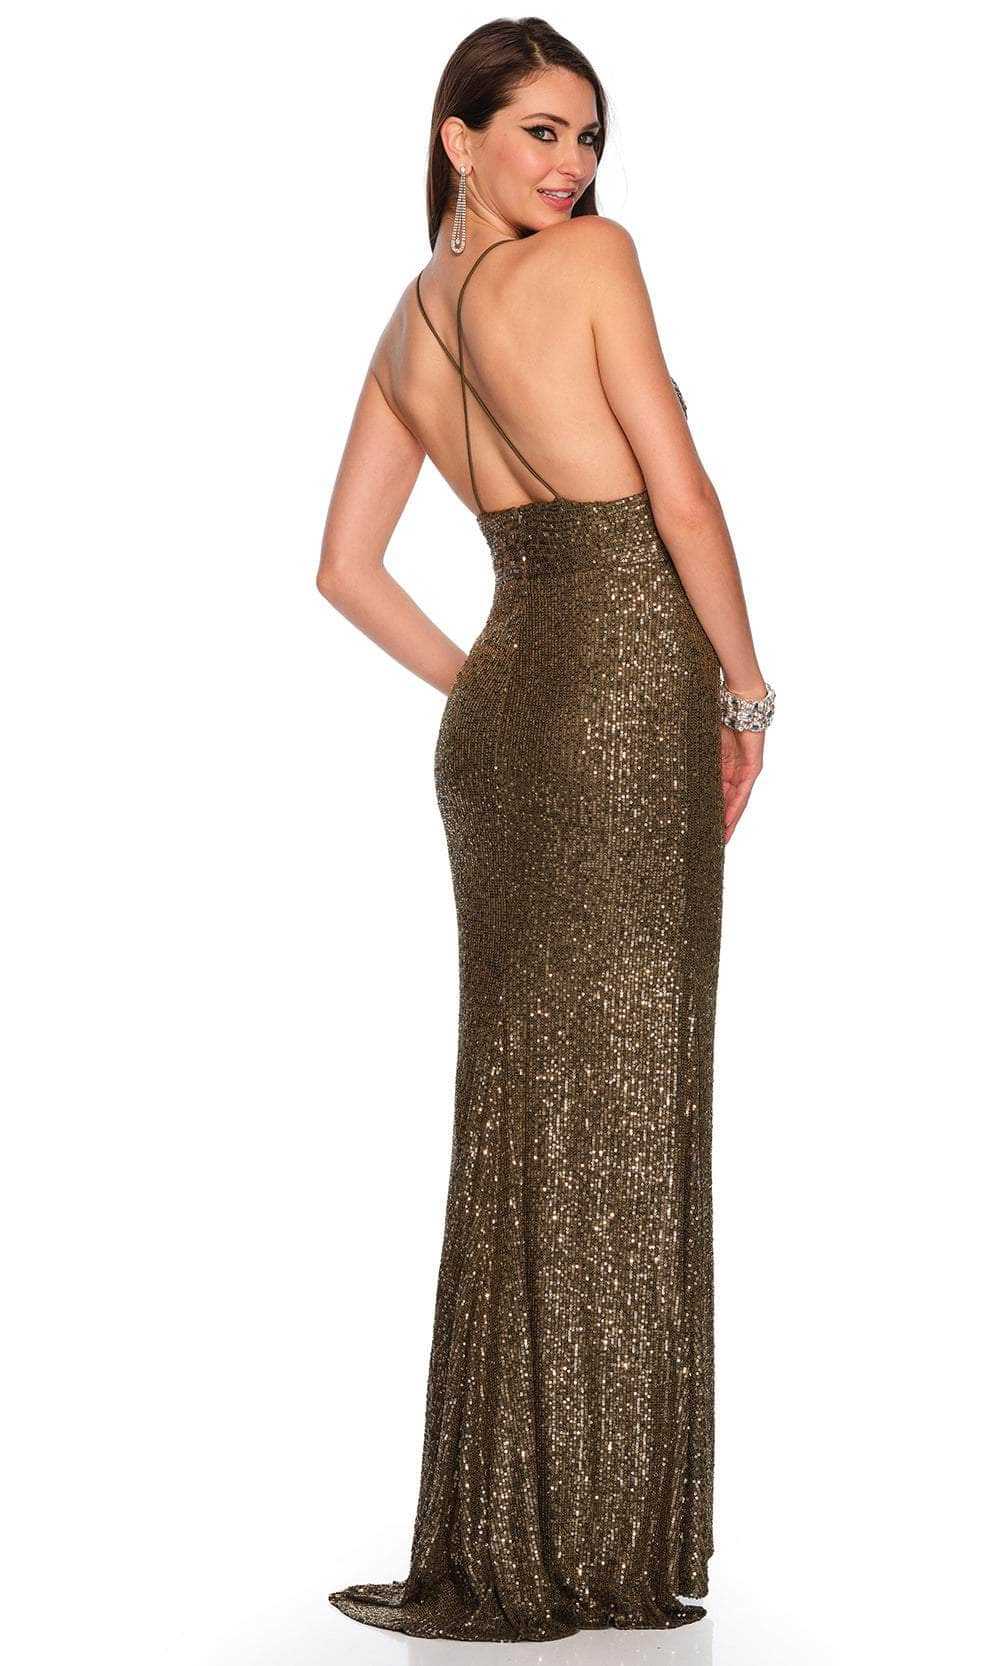 Dave & Johnny, Dave & Johnny 11159 - Crisscross Back Sequin Prom Gown